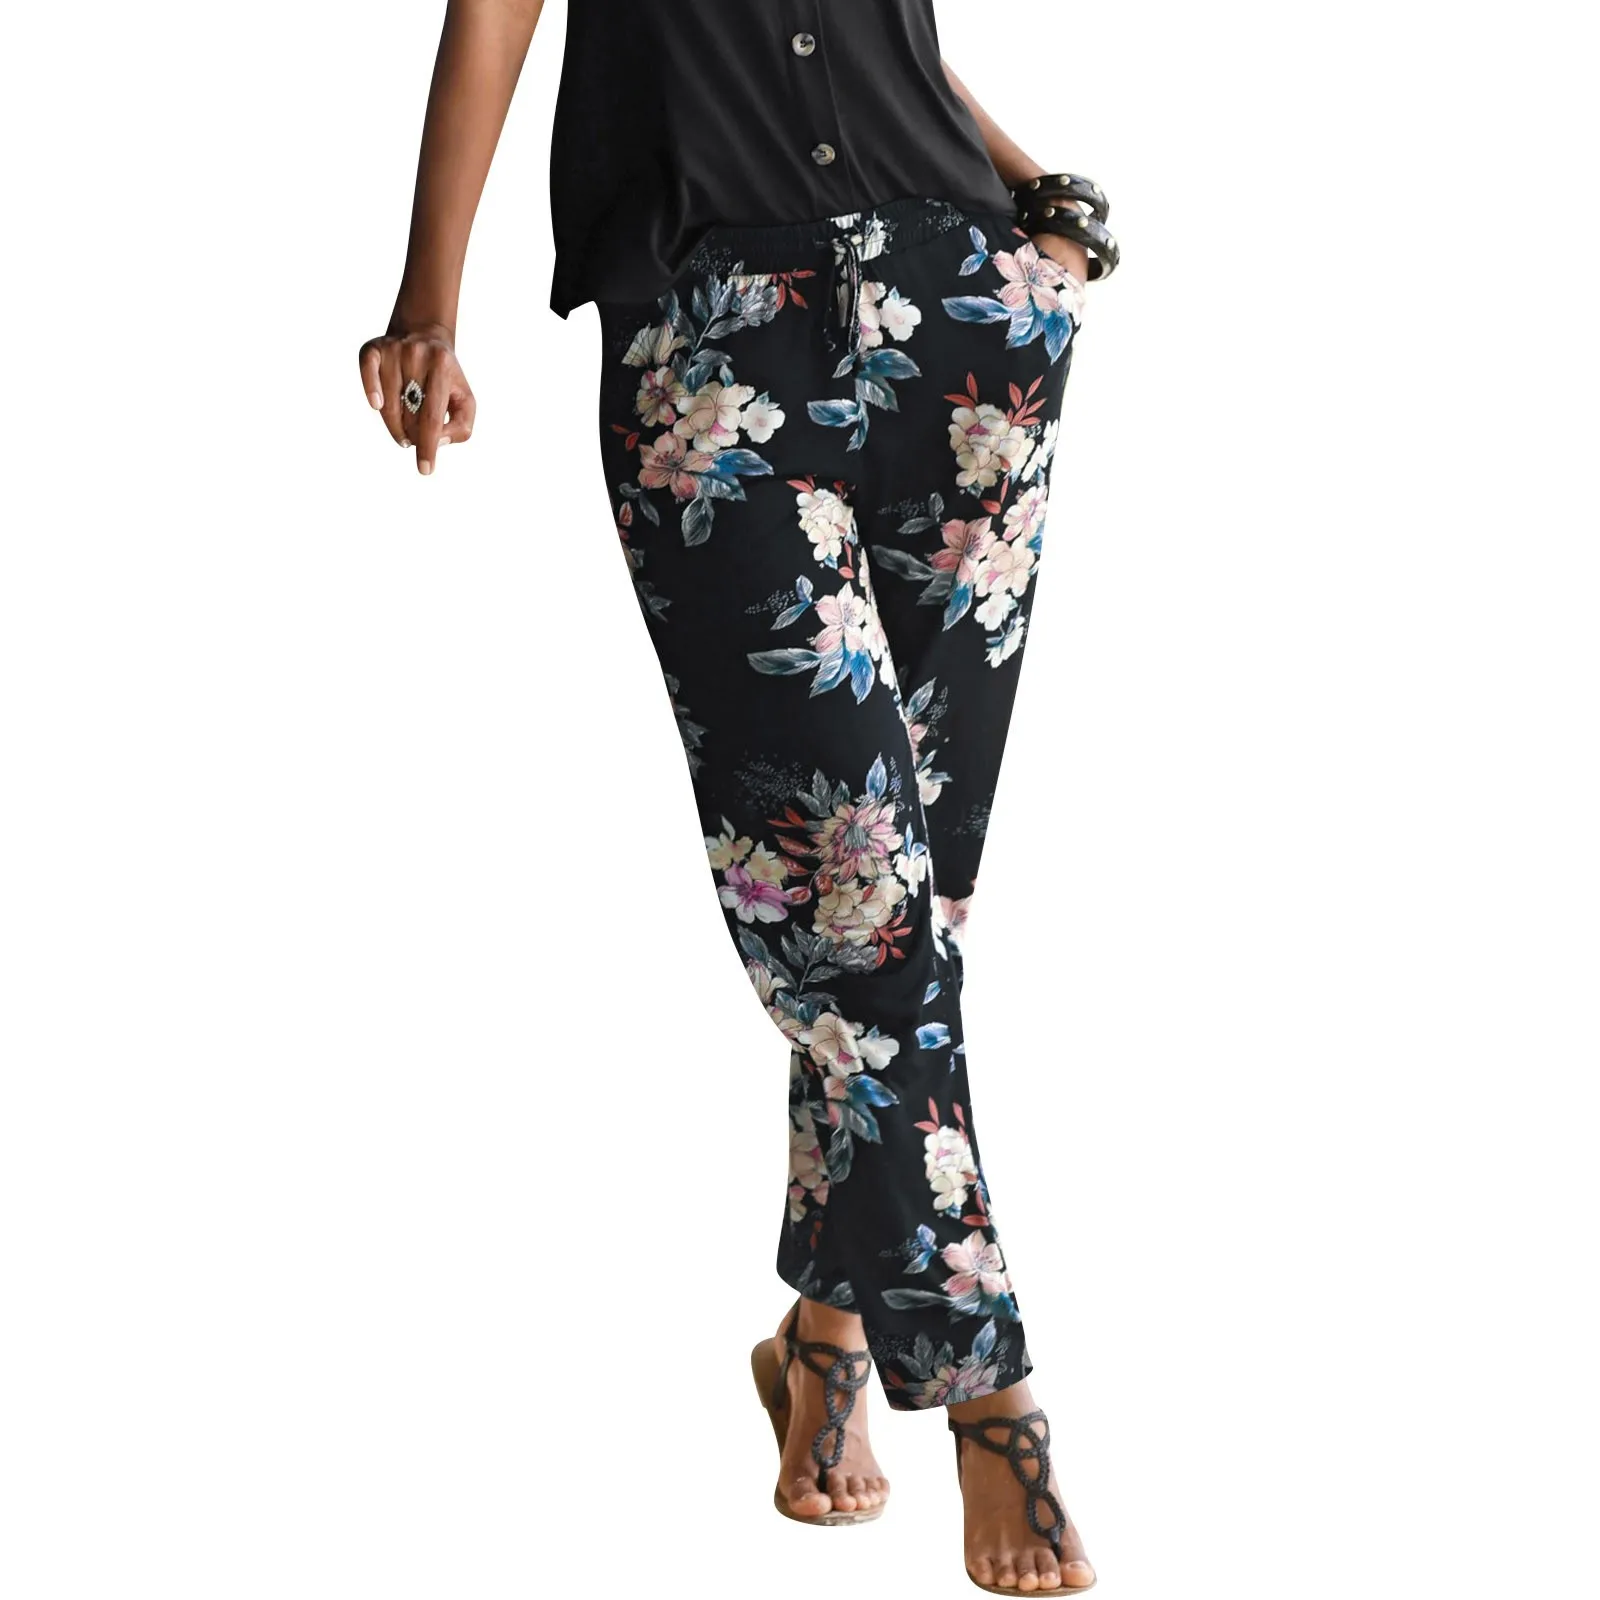 

Fashion Floral Printed Bohemian Beach Holliday Pants Leisure Pants Women's Pants Loose Elastic Waist Trousers With Pockets